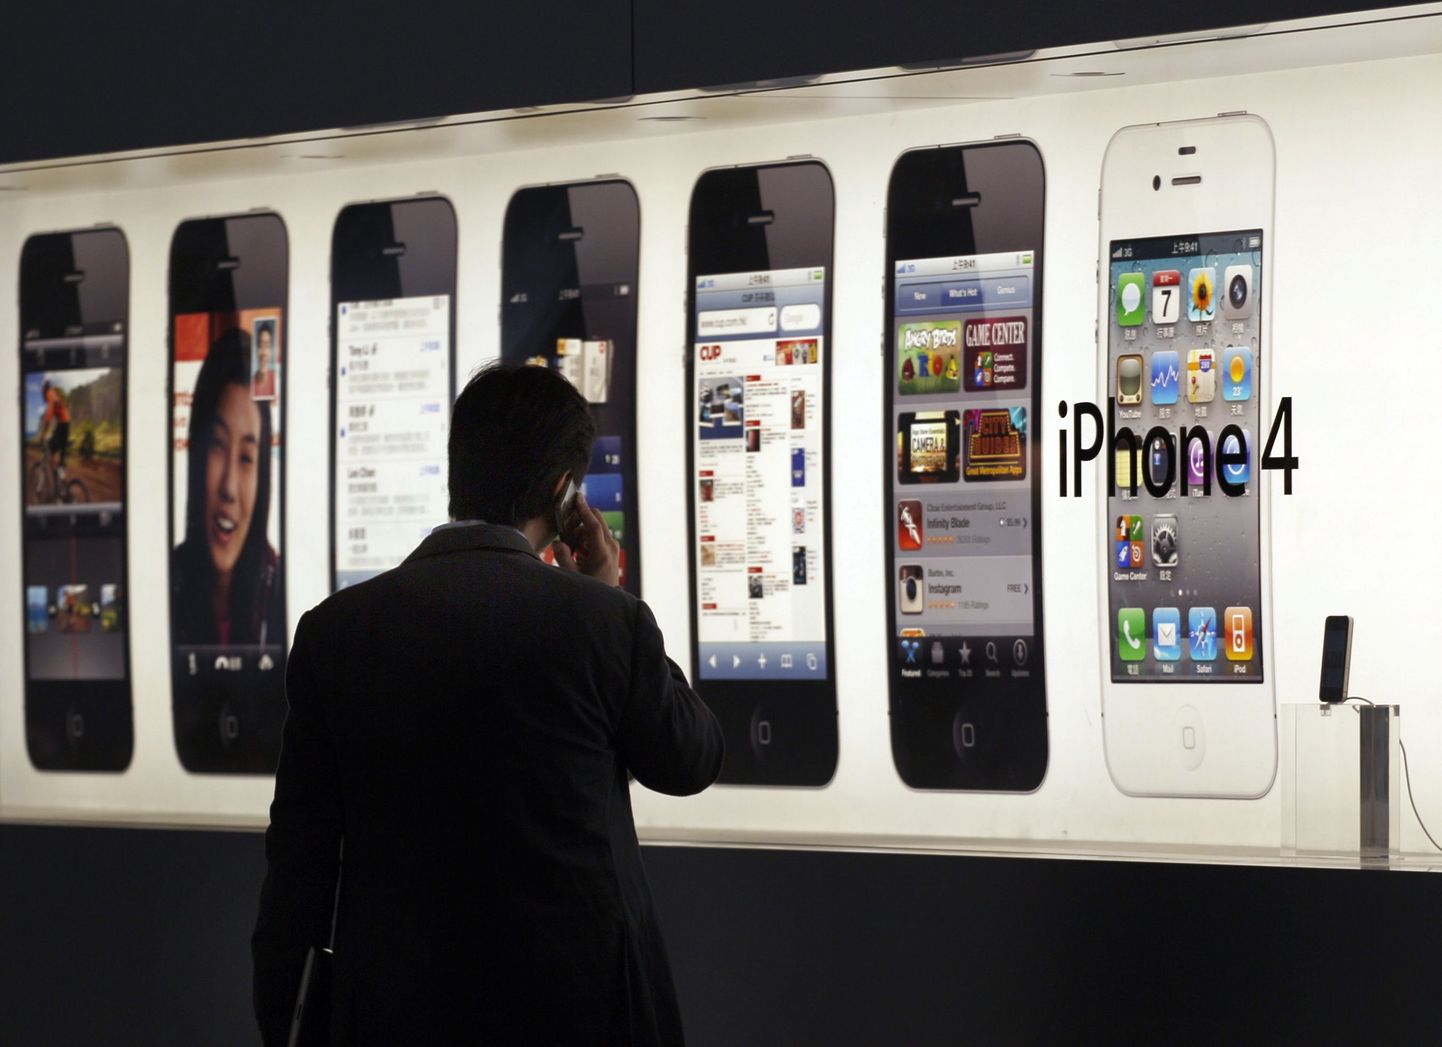 A man talks on an iPhone in front of an advertisement displayed at Hong Kong's first Apple Store at Two IFC before its opening in the financial Central district in this September 21, 2011 file photo. Apple Inc's quarterly results beat Wall Street estimates on stronger-than-expected demand for the iPhone, especially in the greater China region where sales jumped five-fold. Apple sold 35.1 million iPhones - which accounts for about half its revenue - in the March quarter of 2012, outpacing the 30 million or so expected by Wall Street analysts. REUTERS/Tyrone Siu/Files (CHiNA - Tags: BUSINESS)